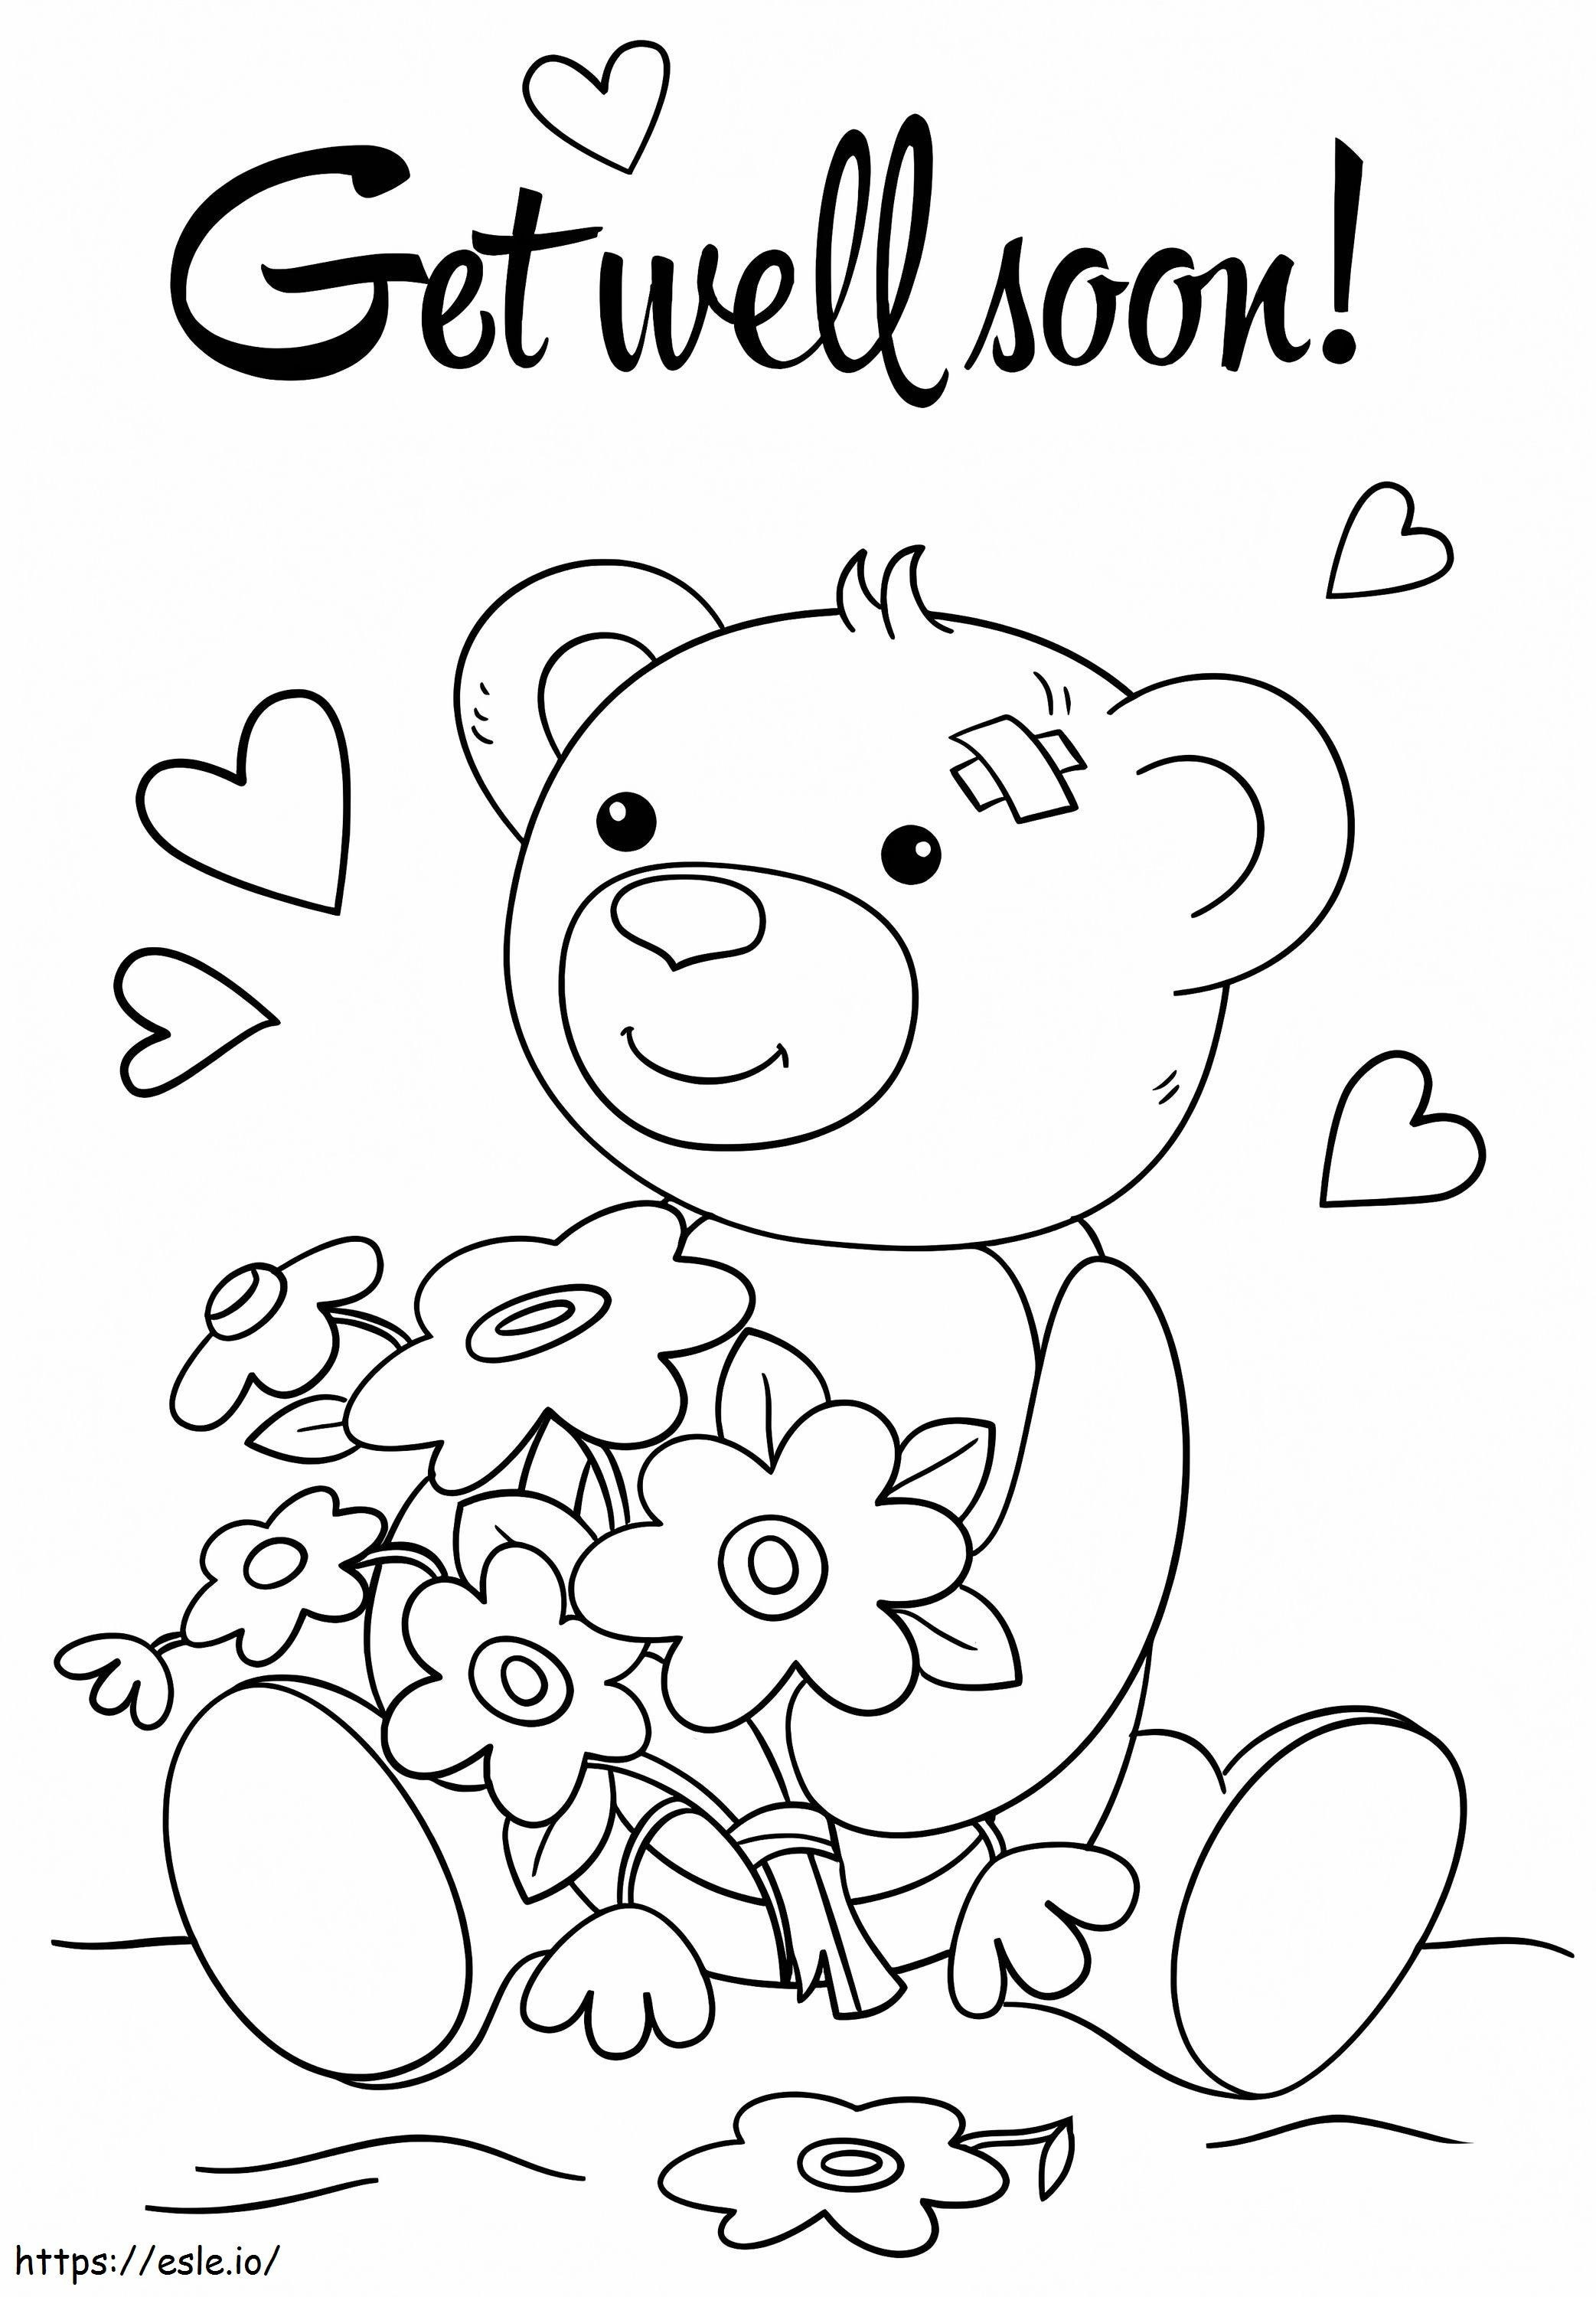 Cute Get Well Soon Coloring Page coloring page